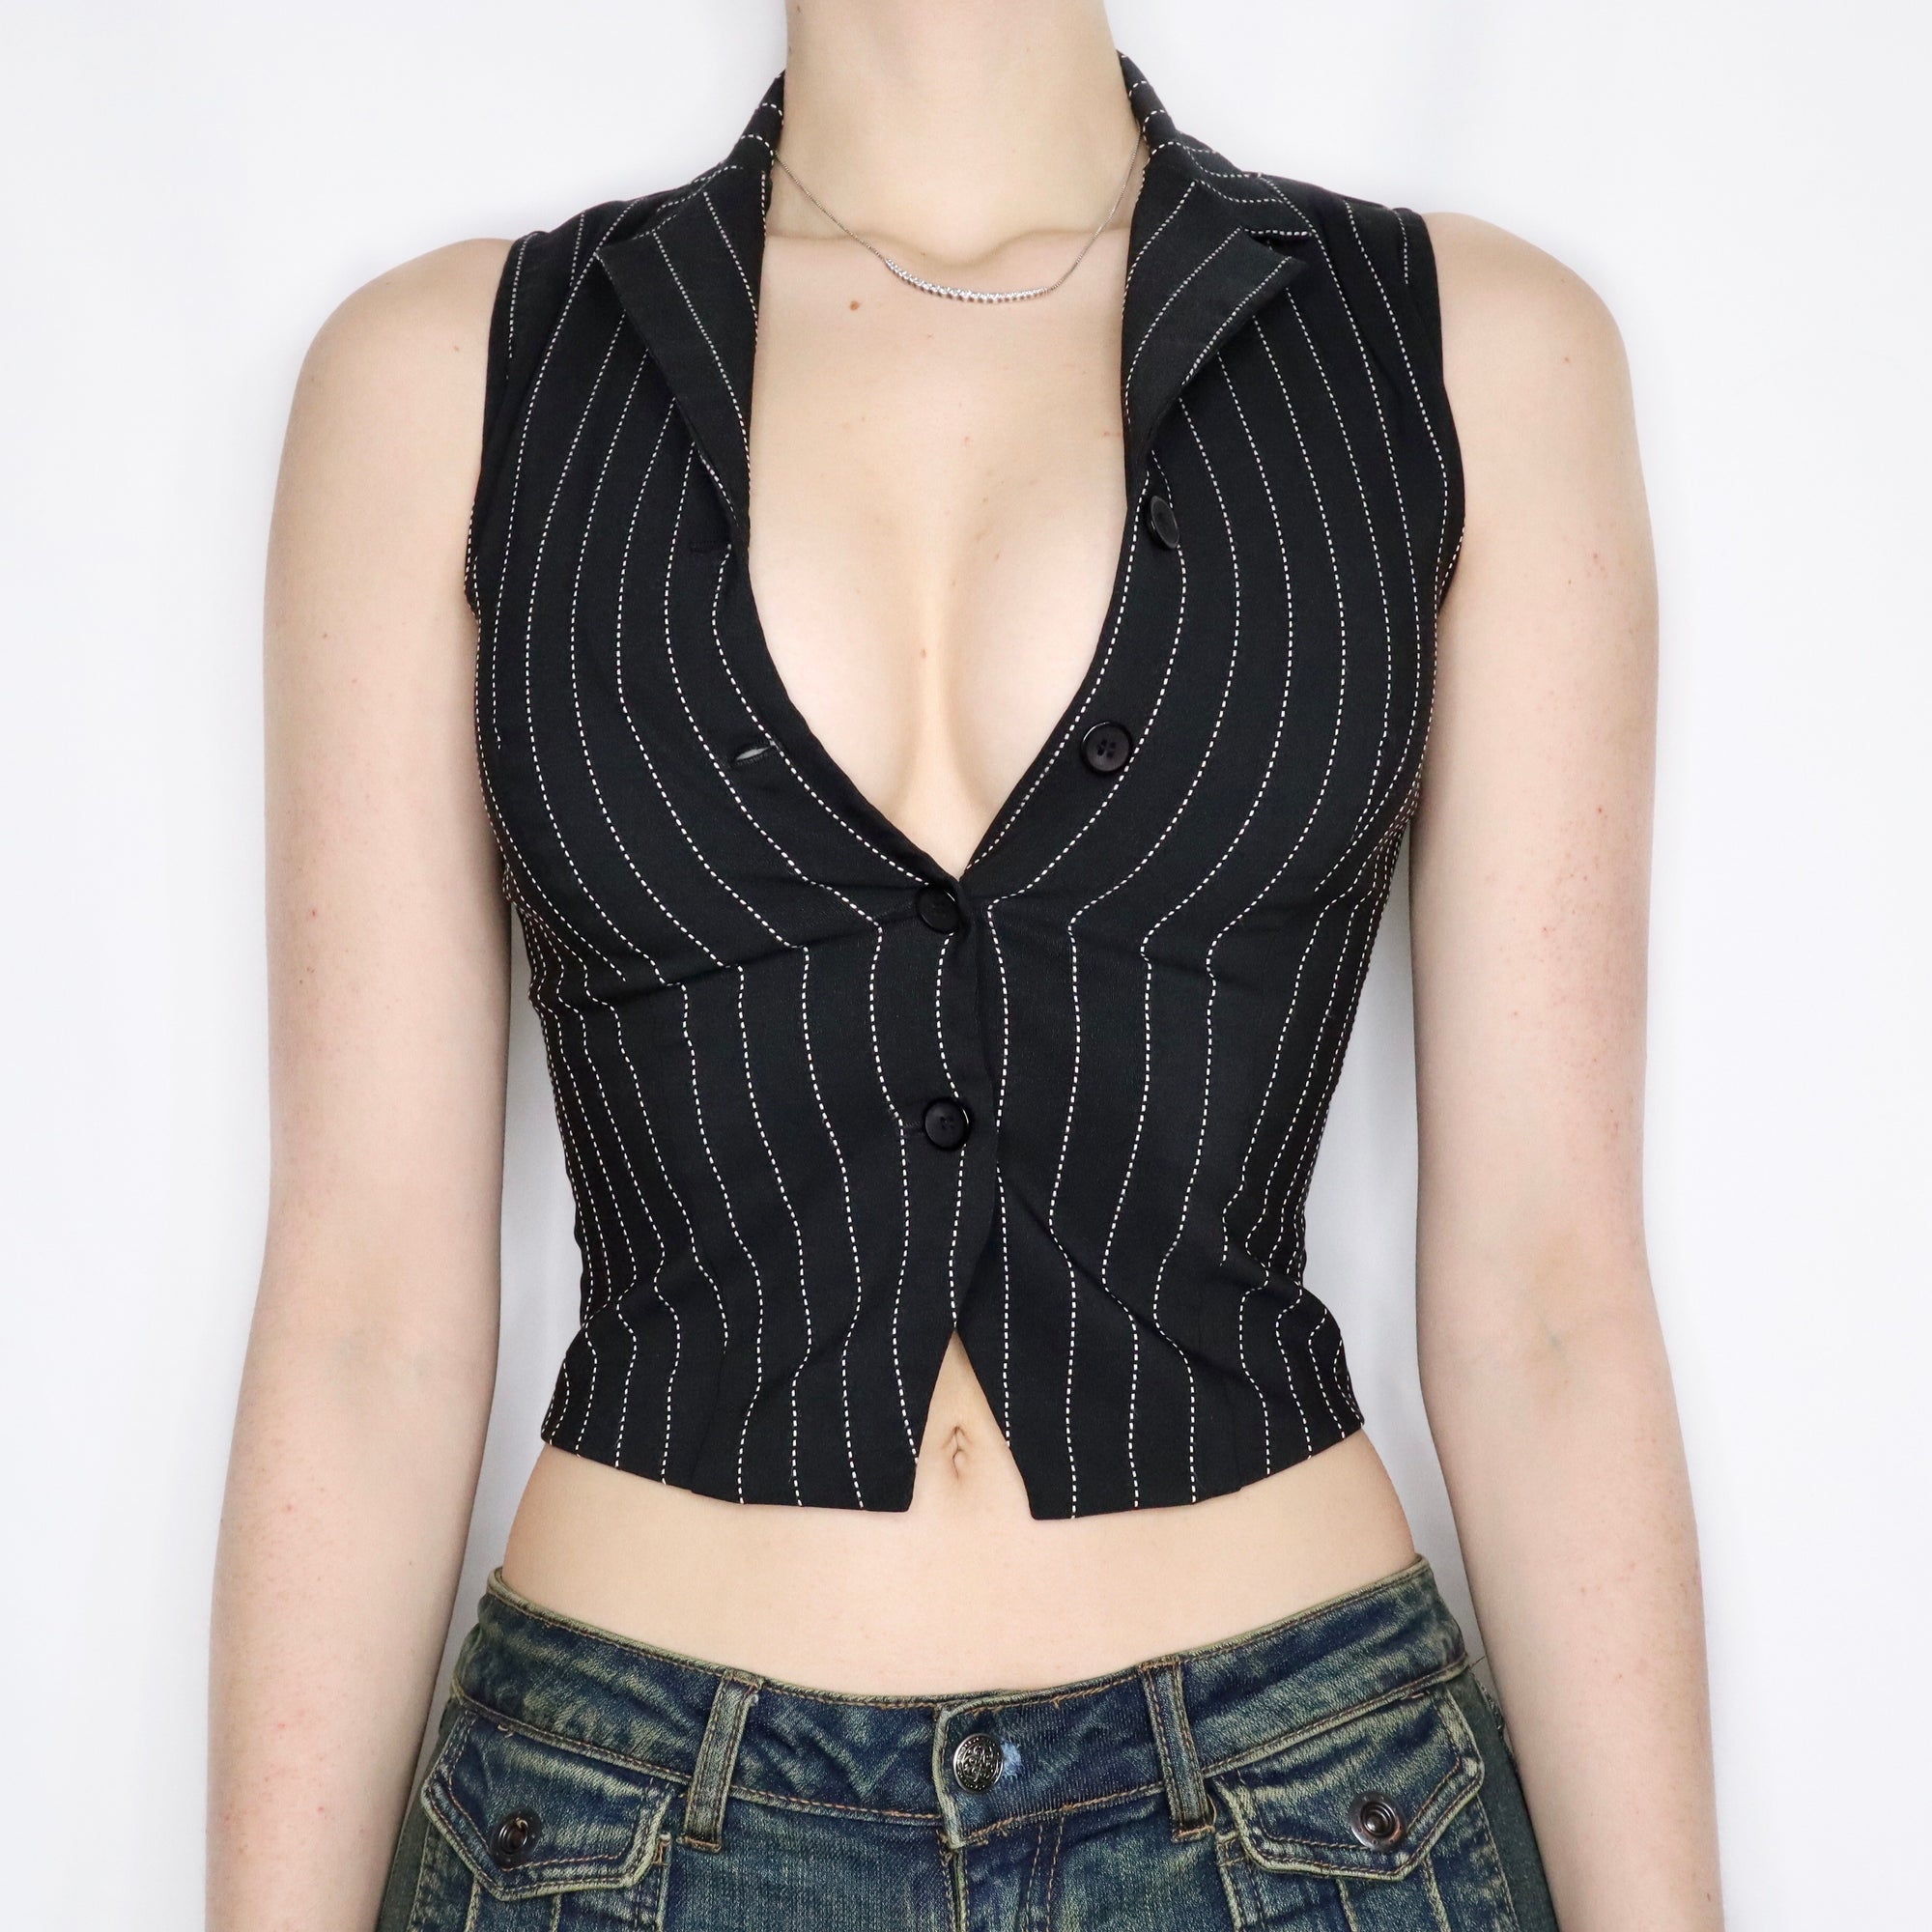 Vintage Early 2000s Black and White Pinstripe Button-Up Vest